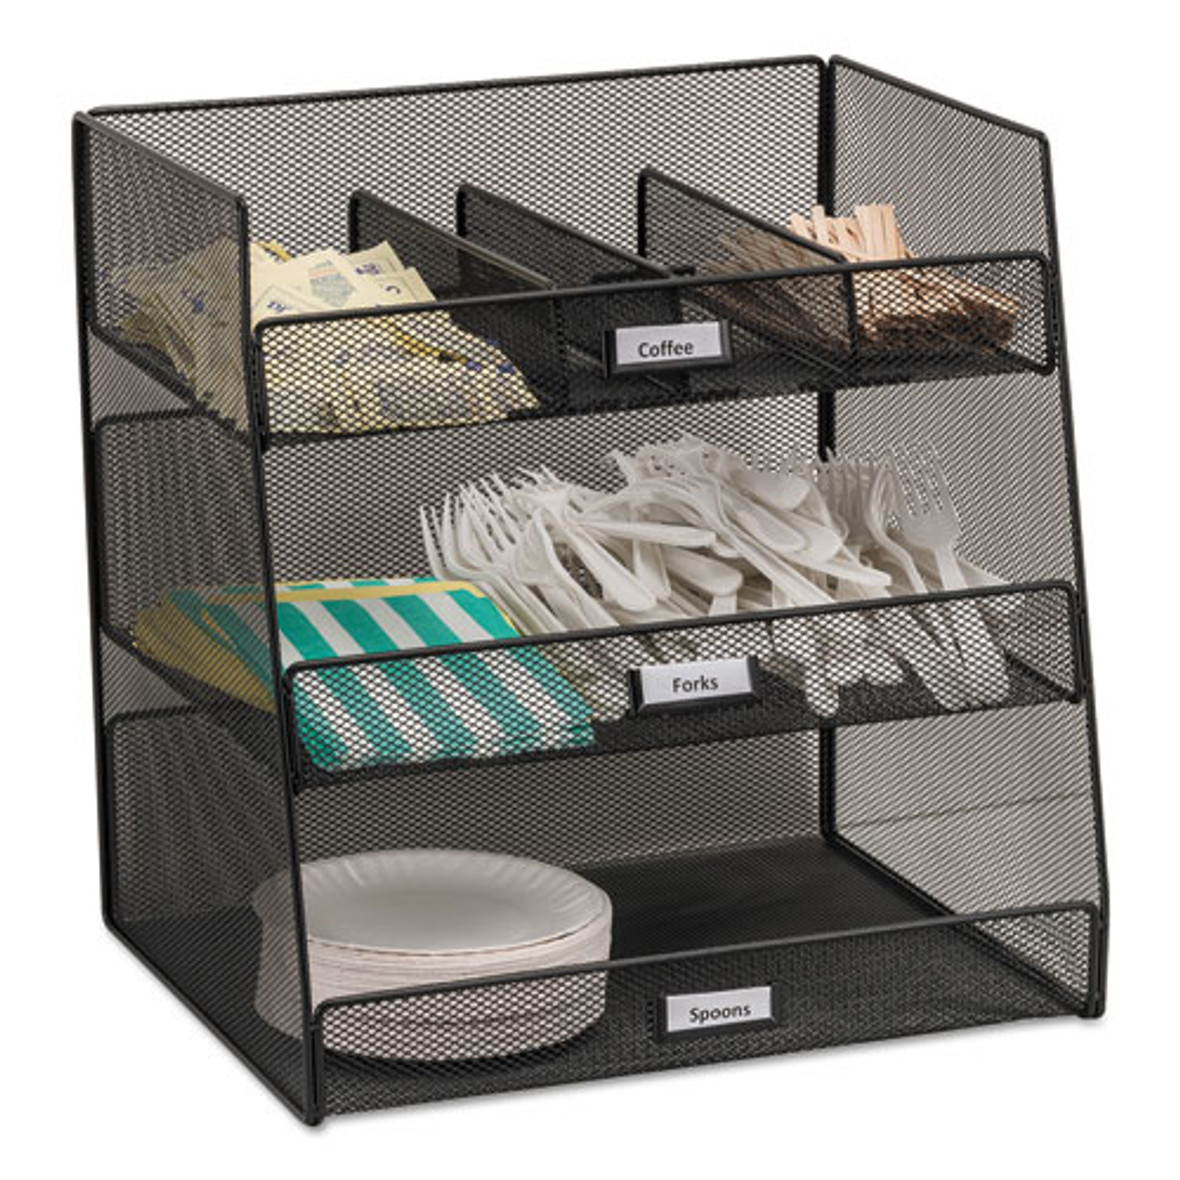 Safco Onyx Breakroom Organizers, 3 Compartments